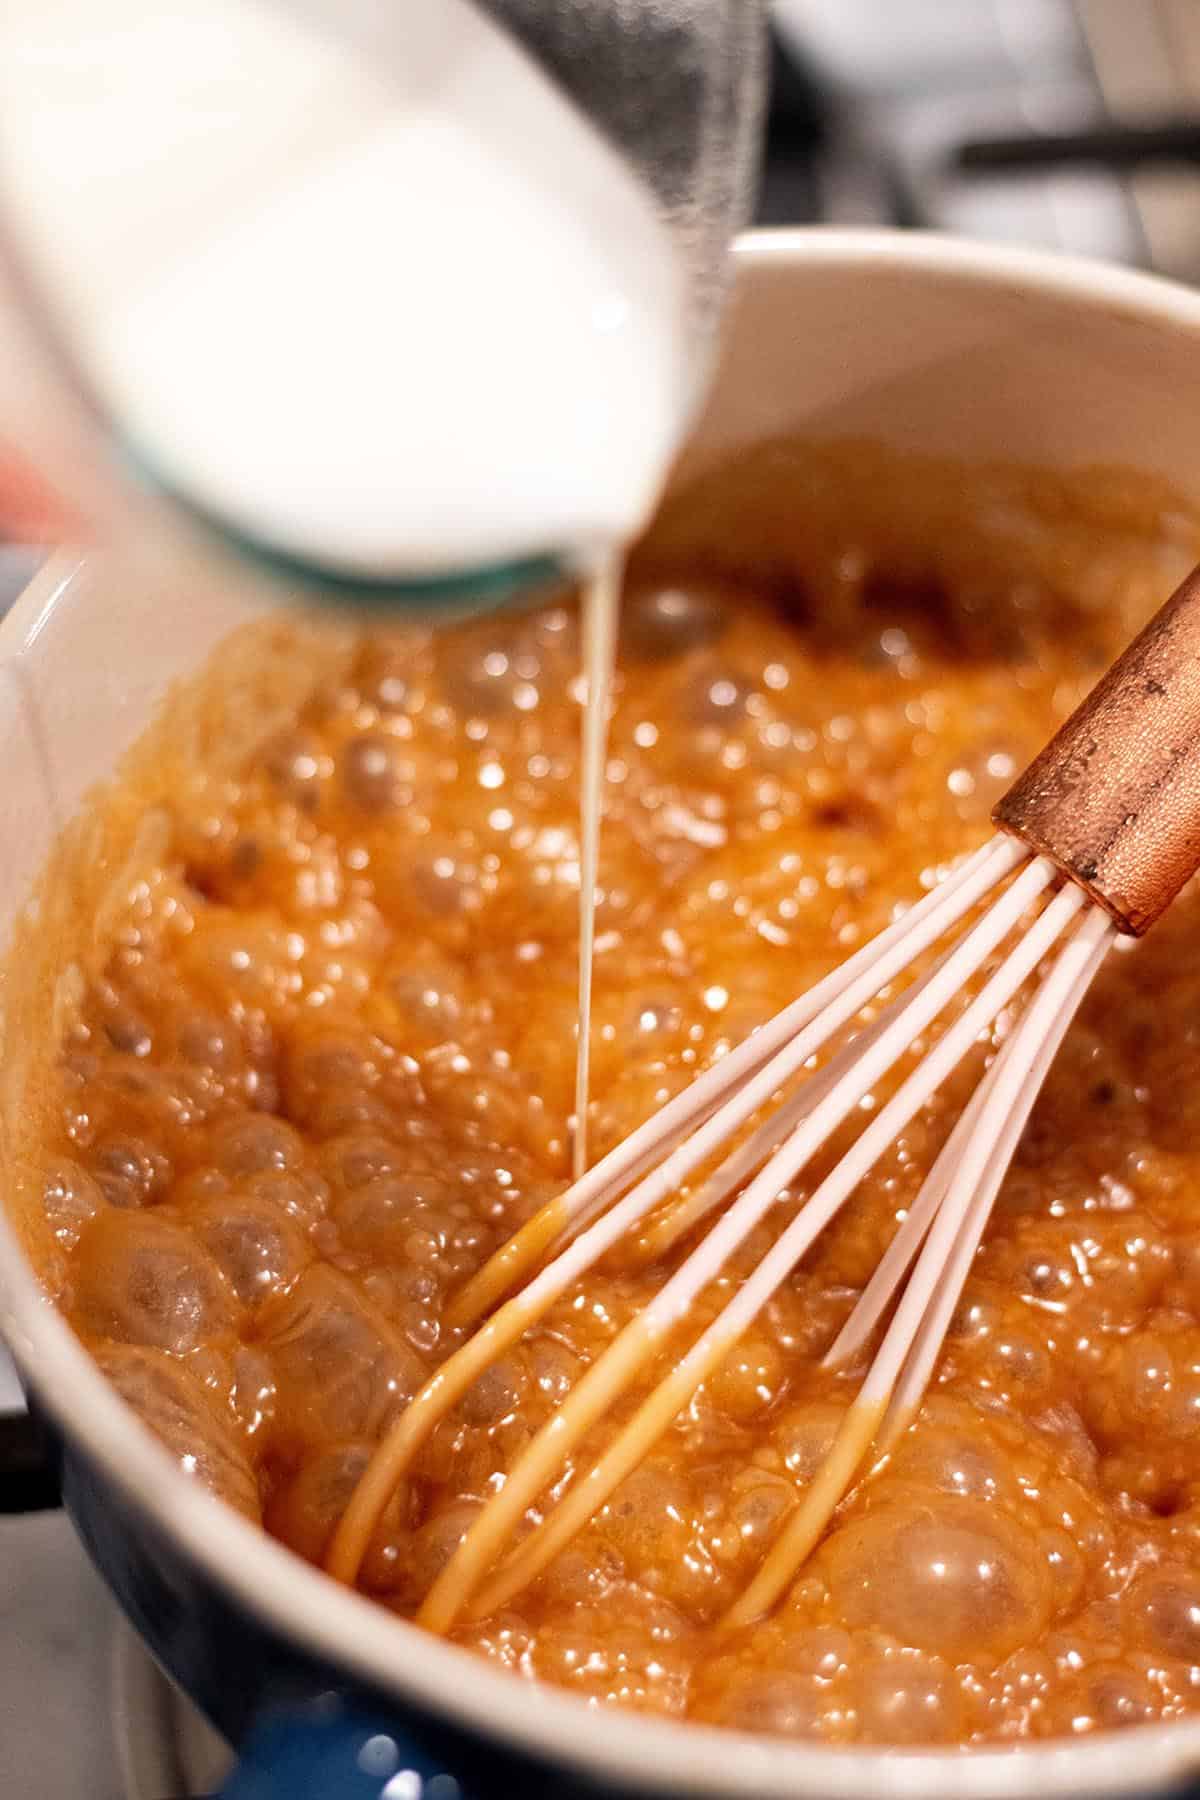 A small sauce pot with a bubbling caramel sauce with cream being whisked in.